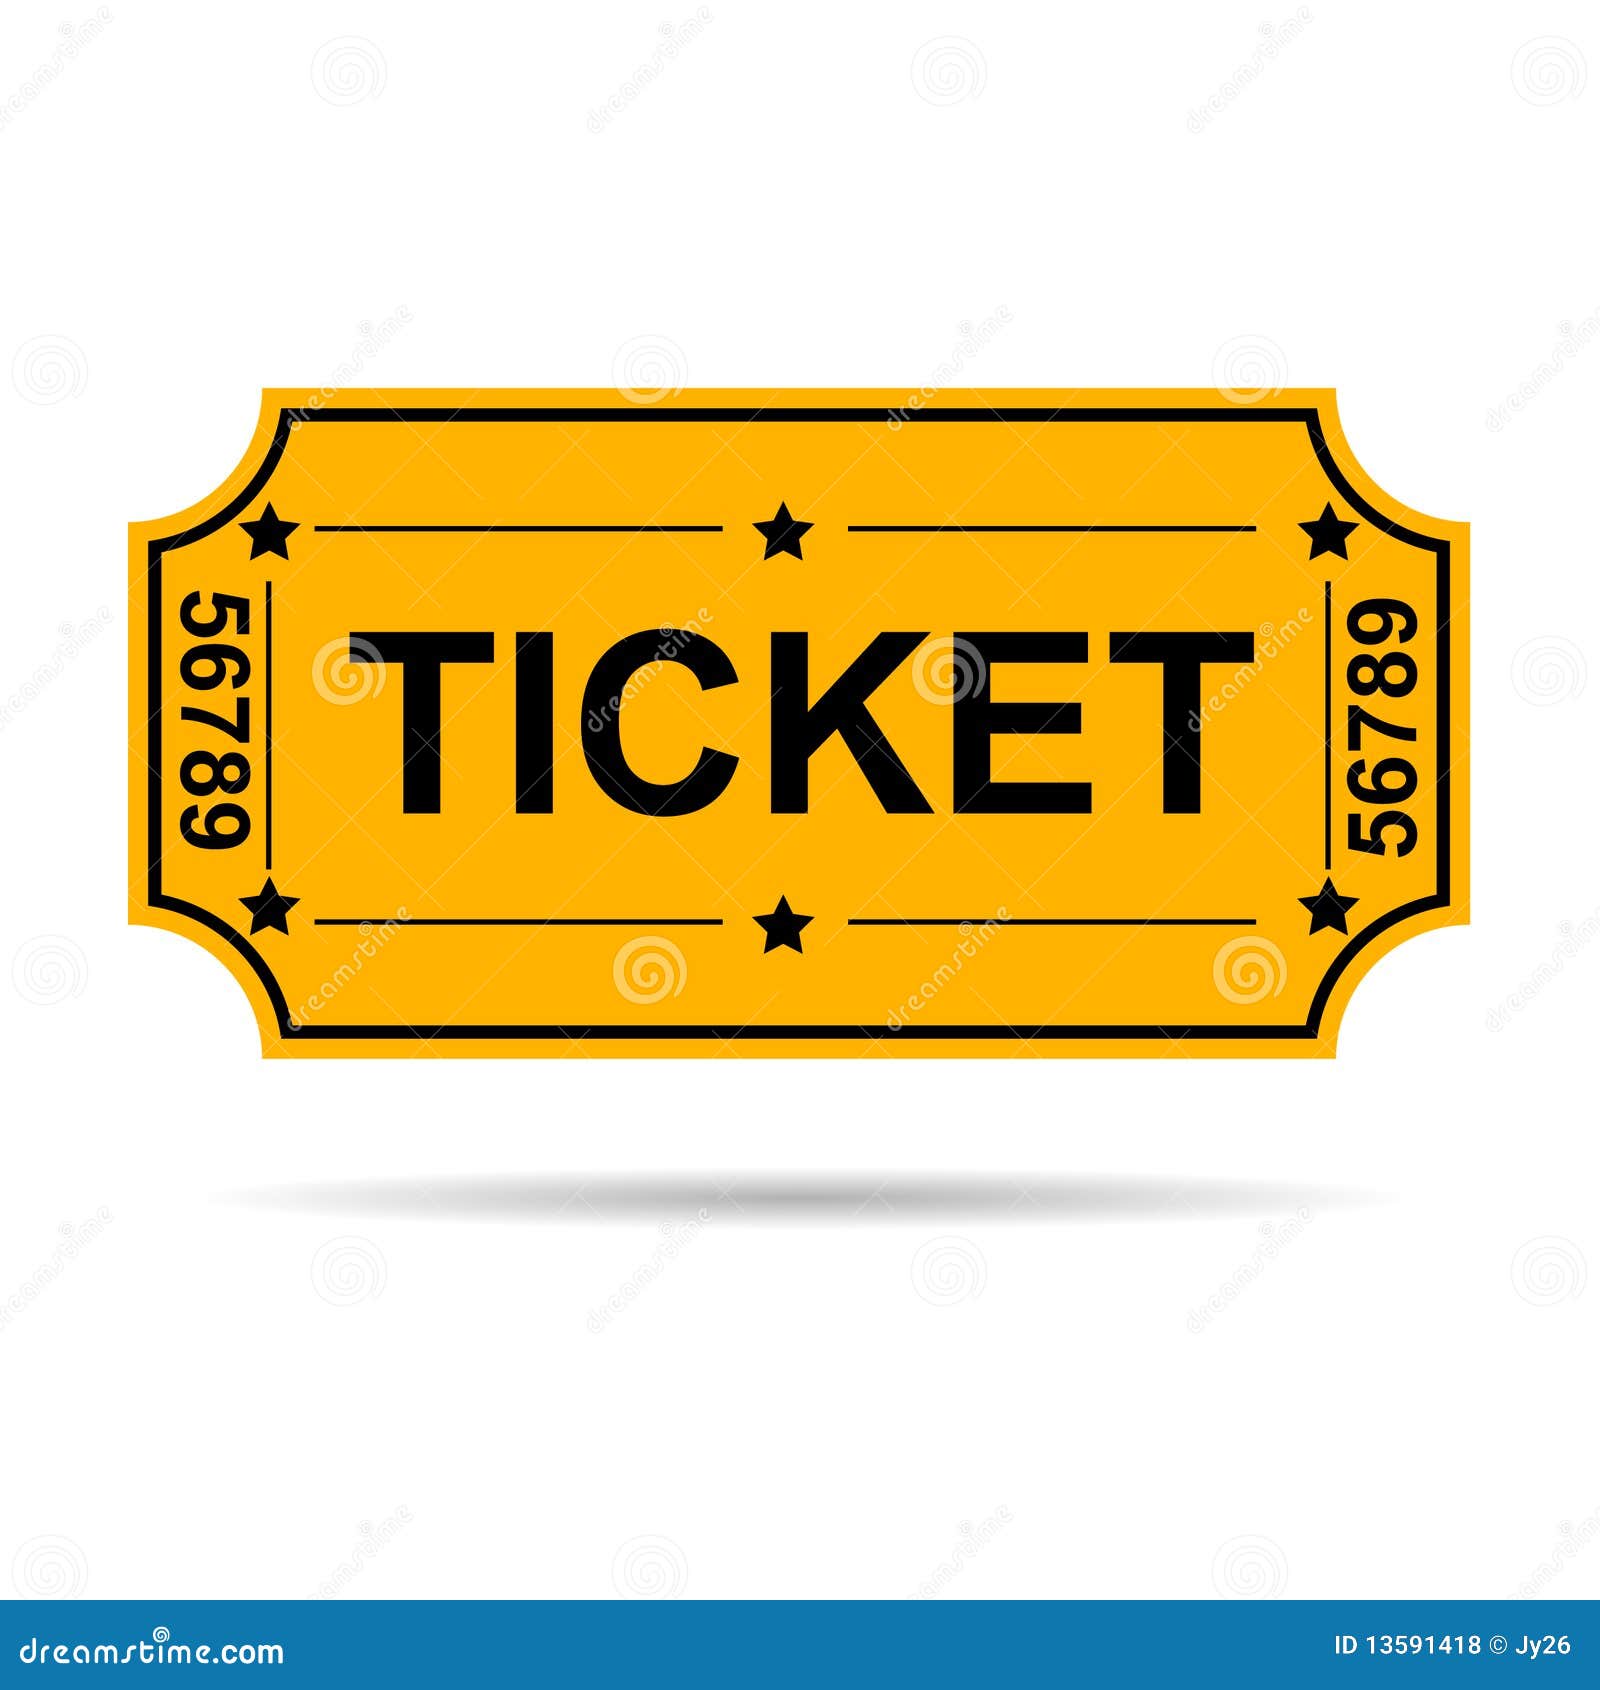 yellow ticket clipart - photo #6